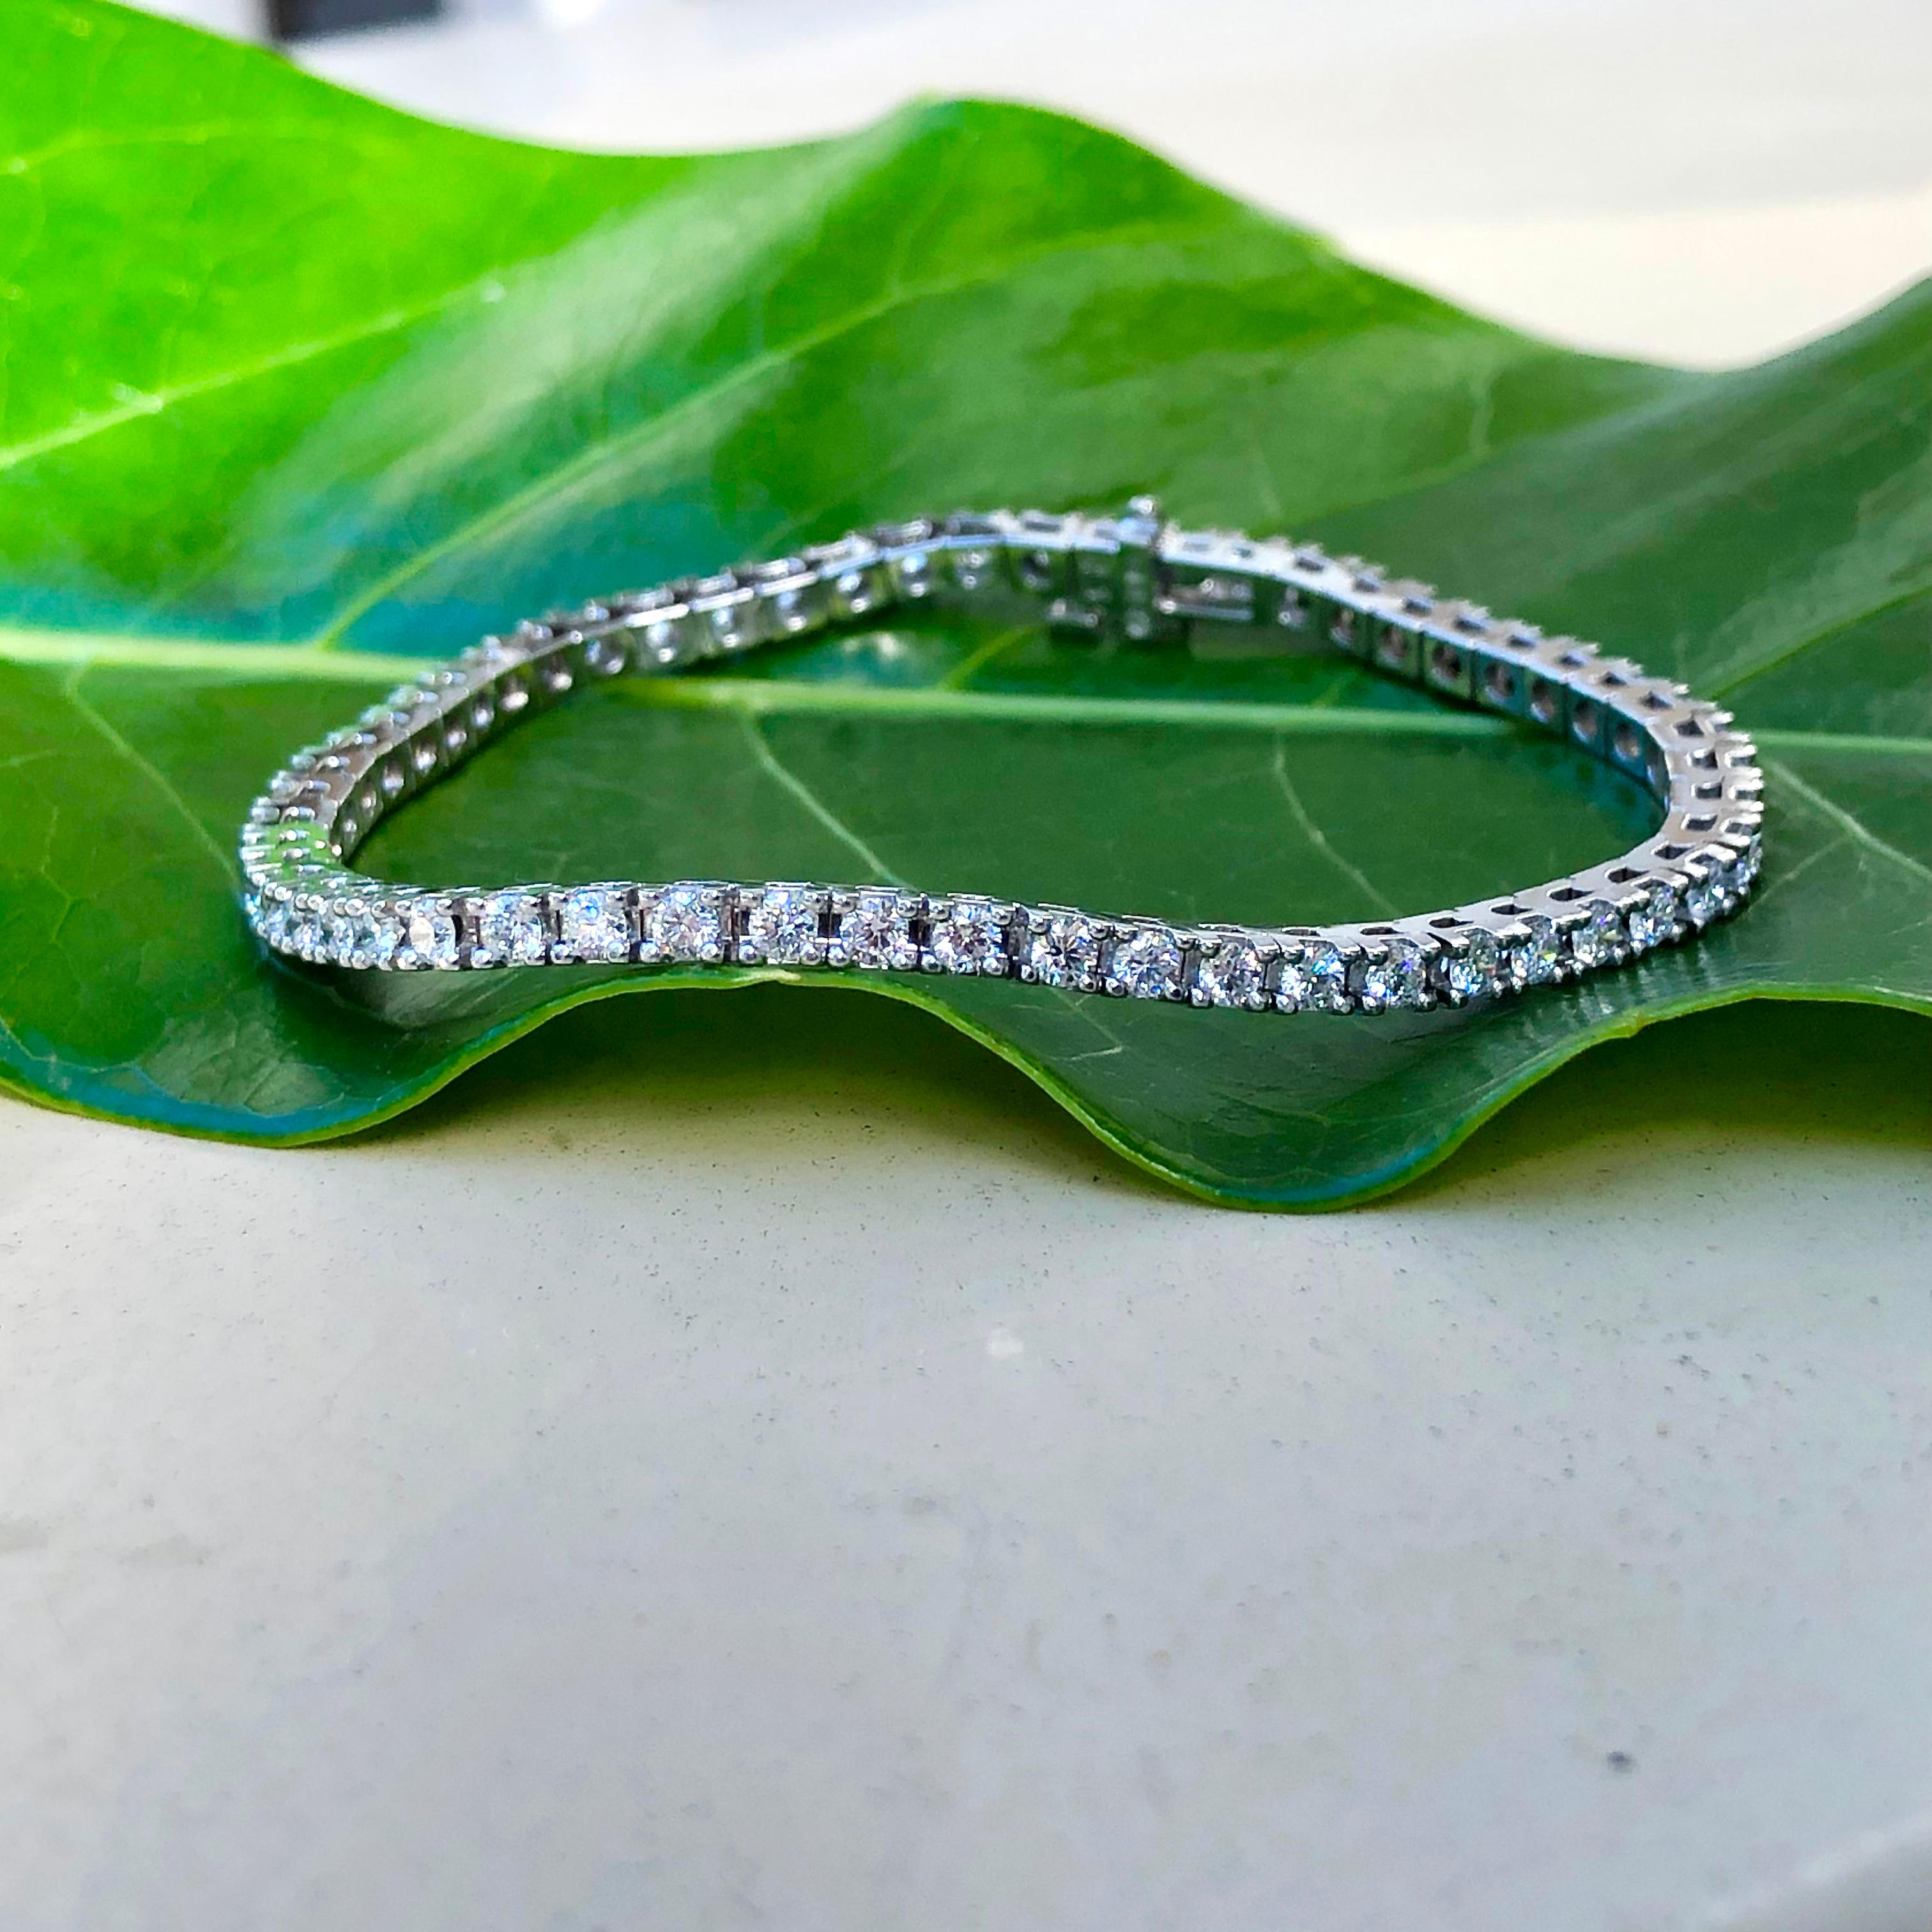 18k white gold tennis bracelet is set with fifty-five (55) Round Brilliant Cut diamonds that measure 2.5mm and weigh a total of 3.03 carats with Clarity Grade VS and Color Grade F-G. The bracelet is 7 1/16